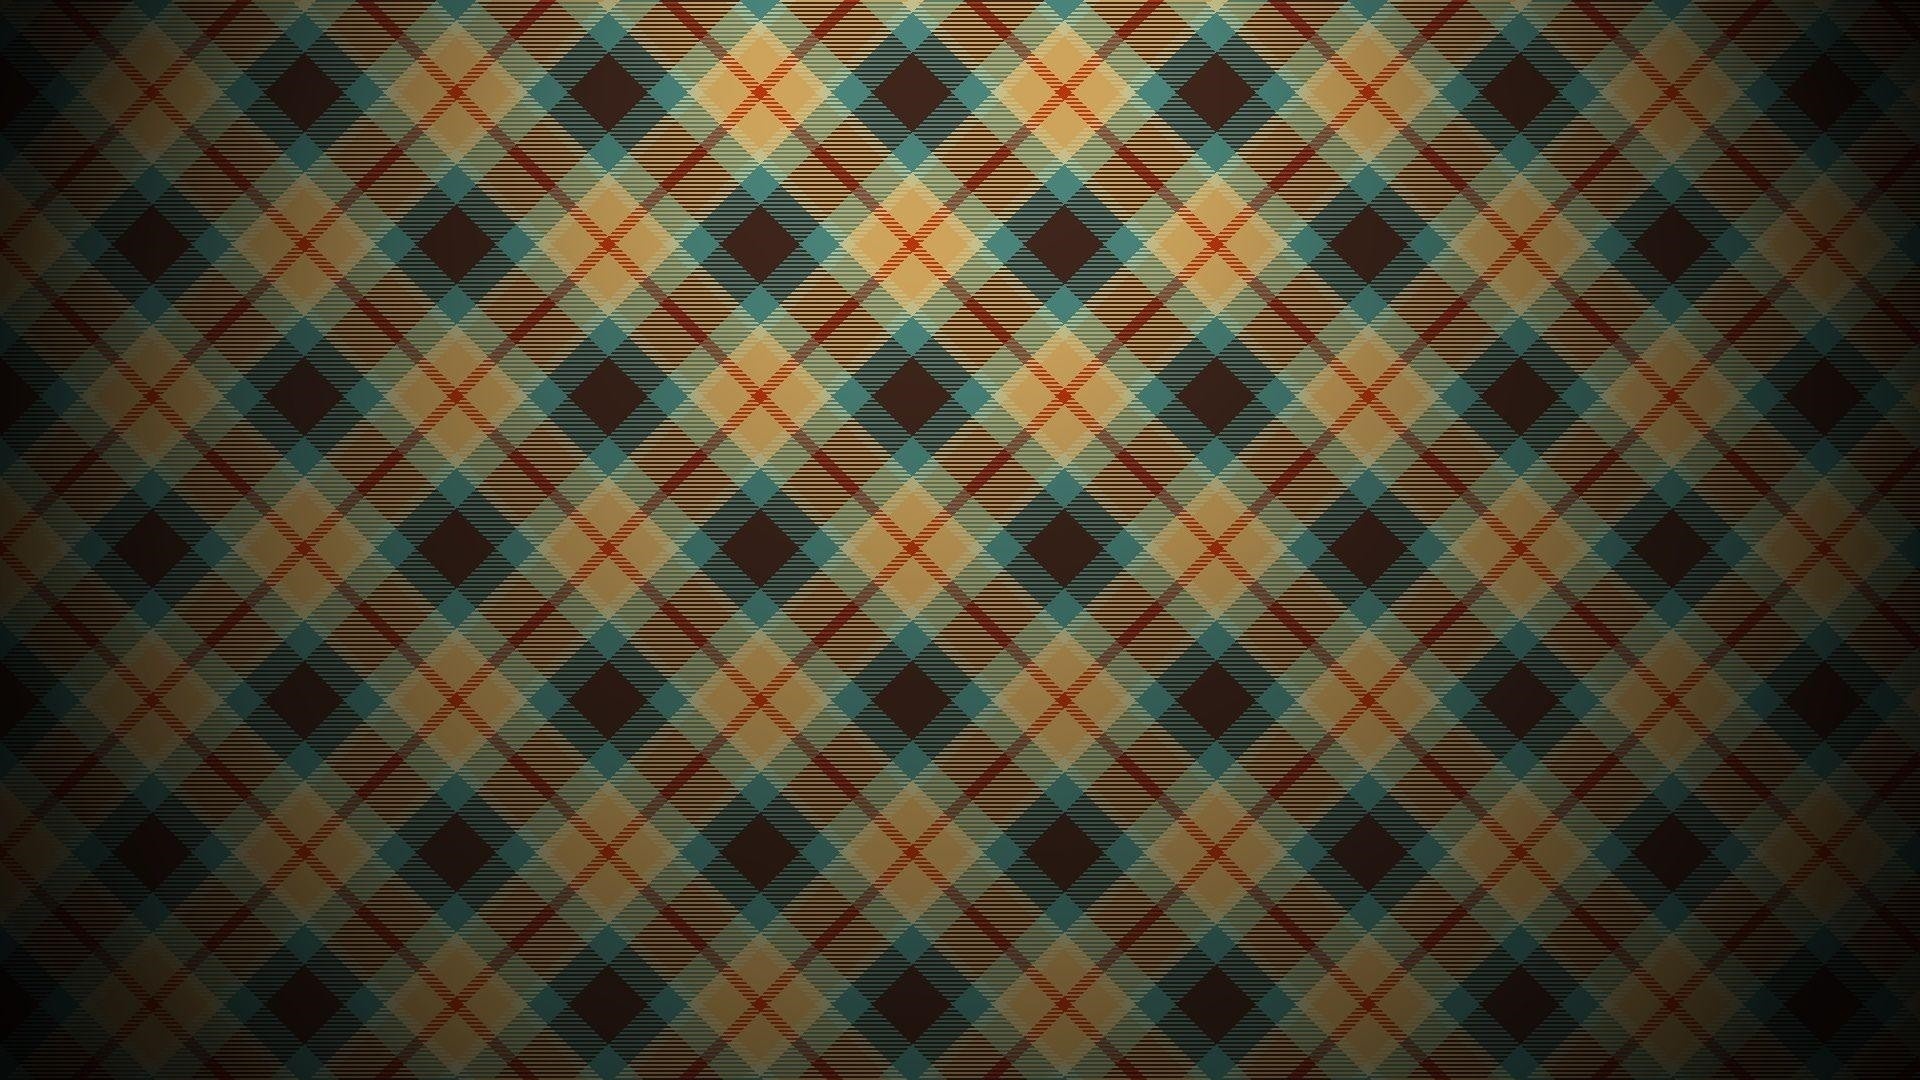 Plaid wallpapers, Checkered, Textures, Vintage, 1920x1080 Full HD Desktop